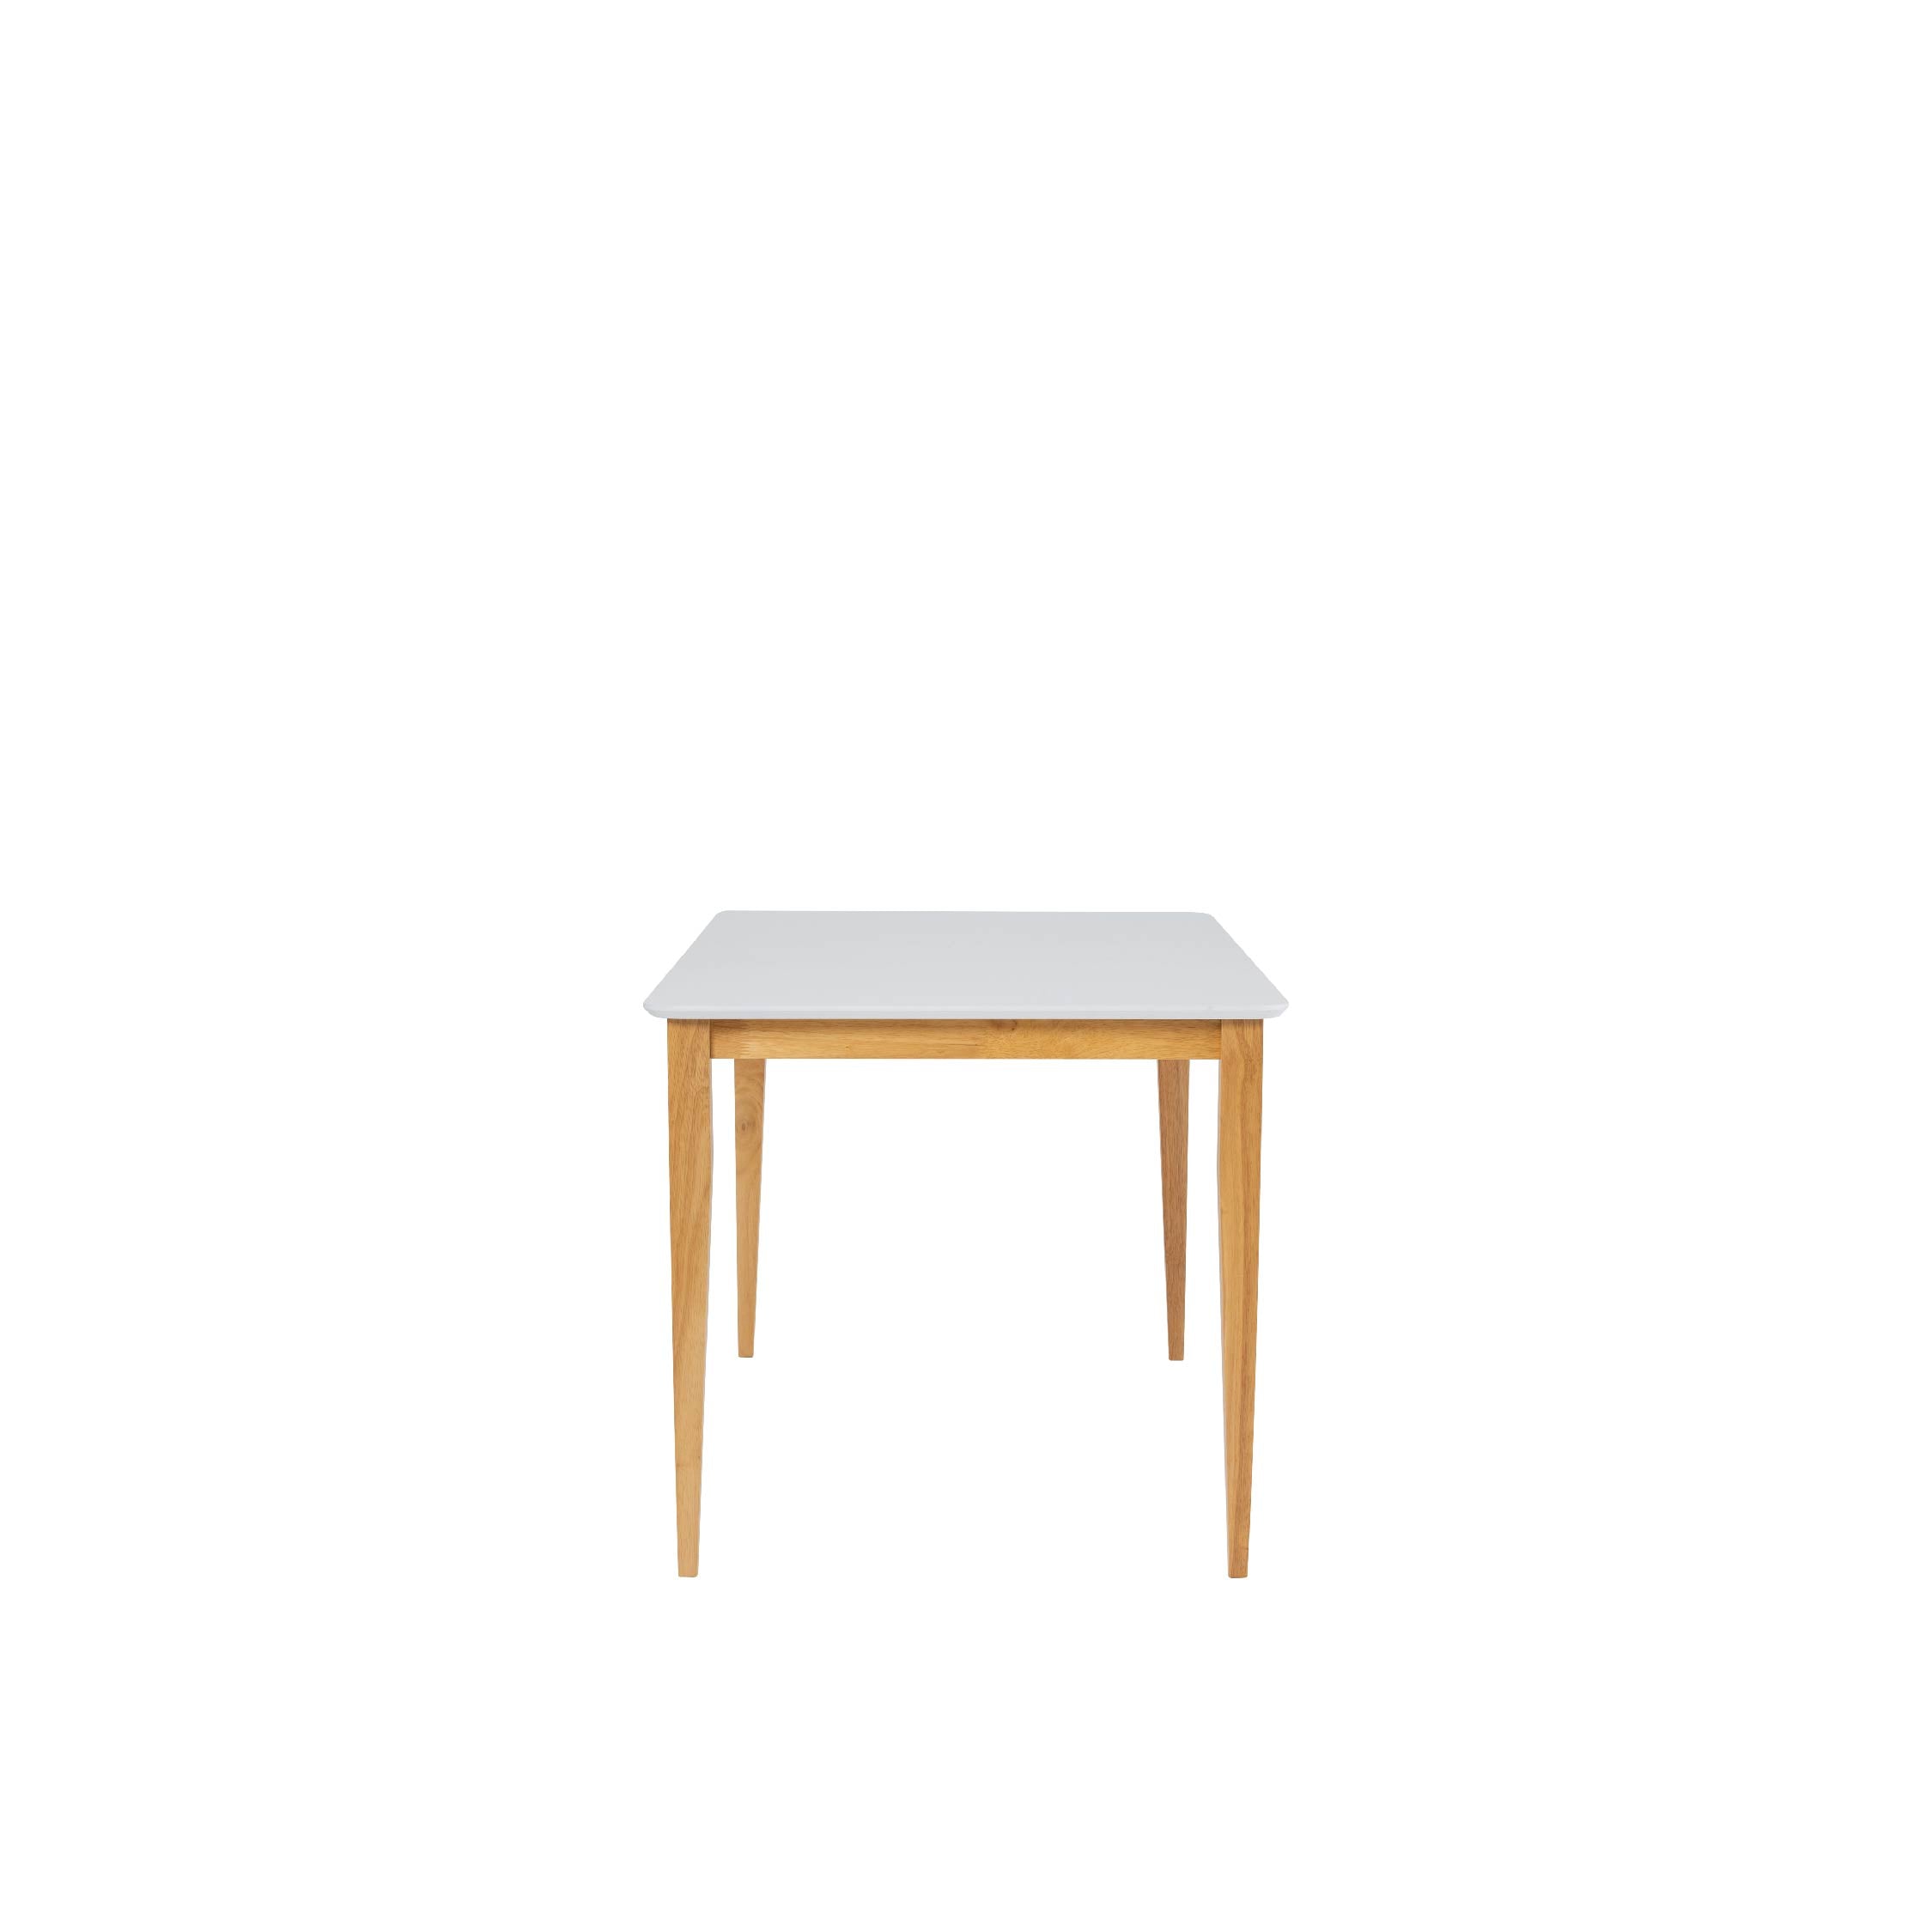 BASIC Dining Table 1.4m